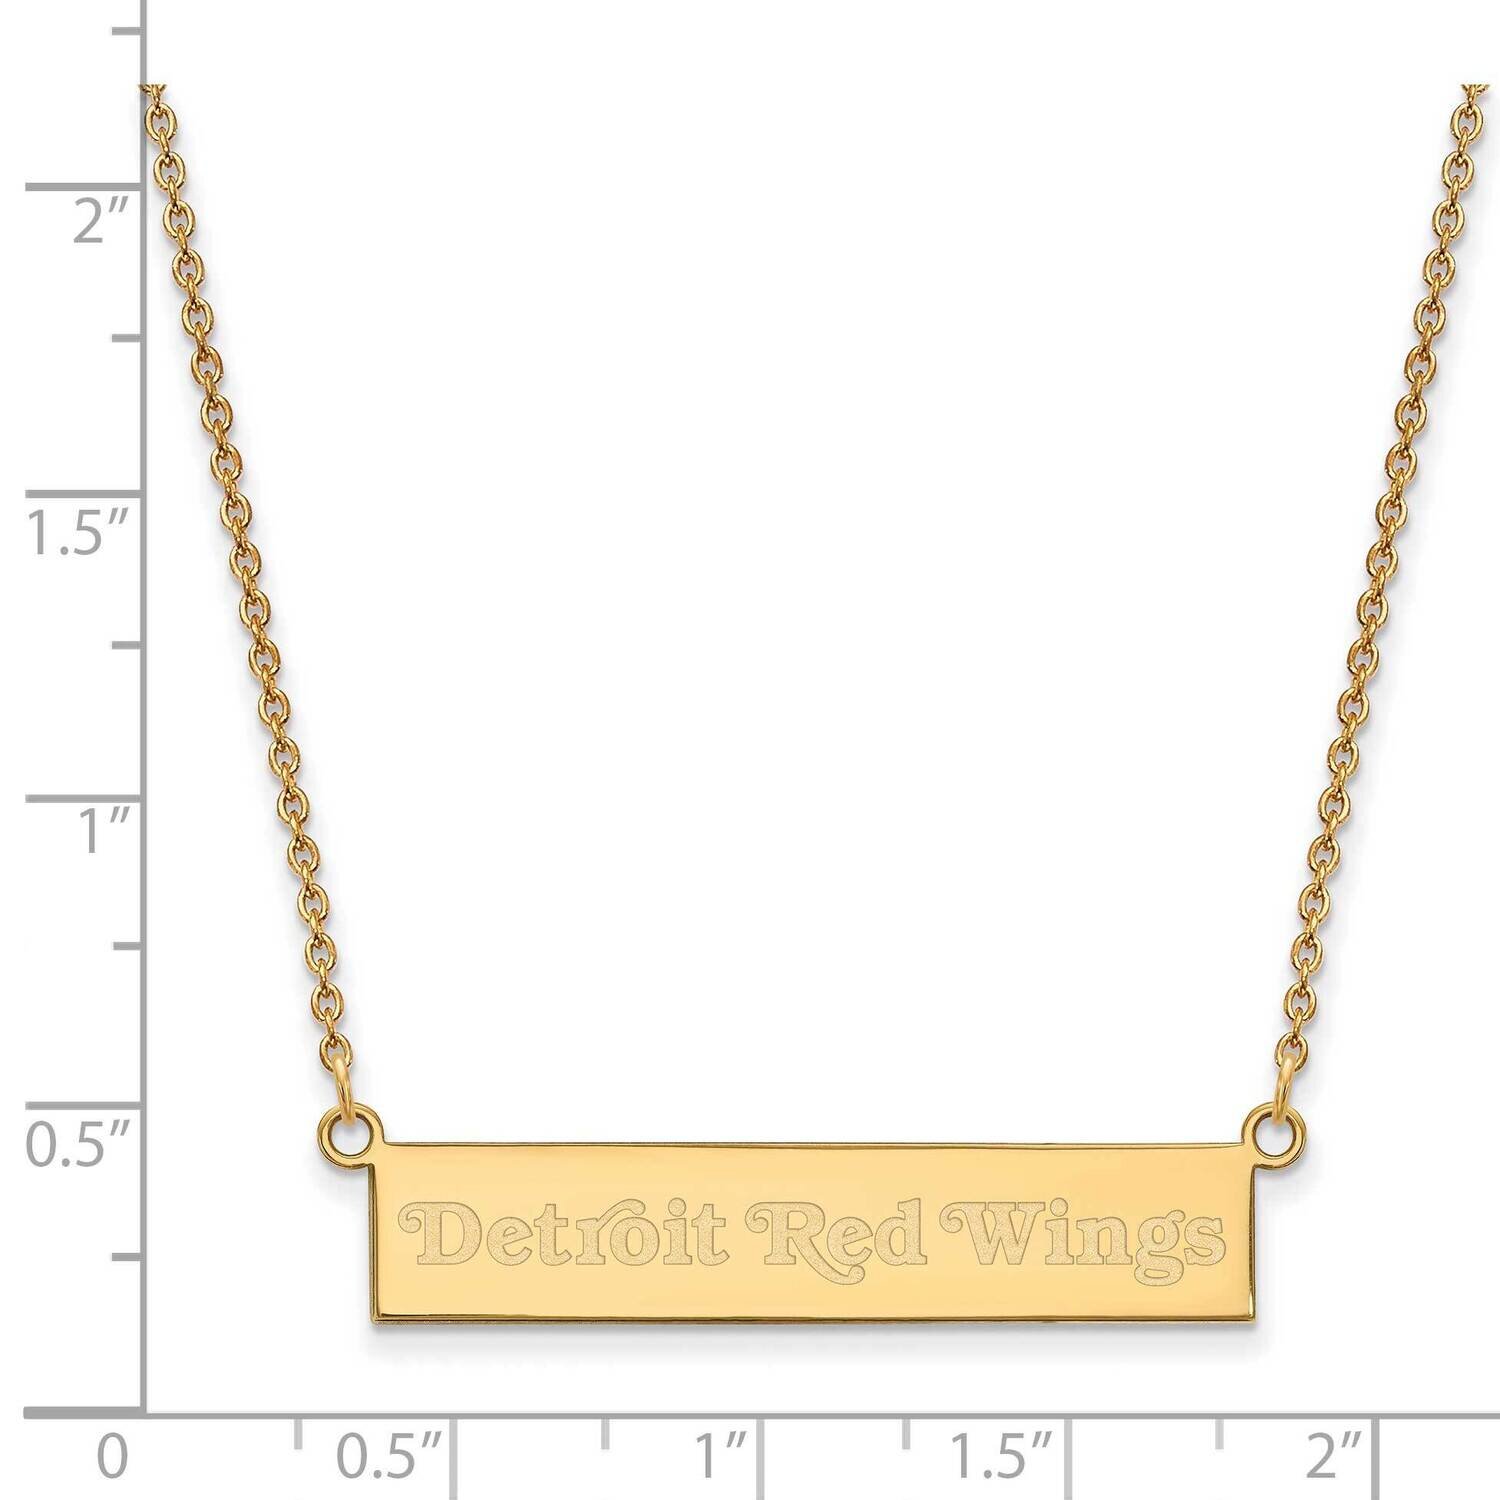 Detroit Red Wings Small Bar Necklace Gold-plated Sterling Silver GP041RWI-18